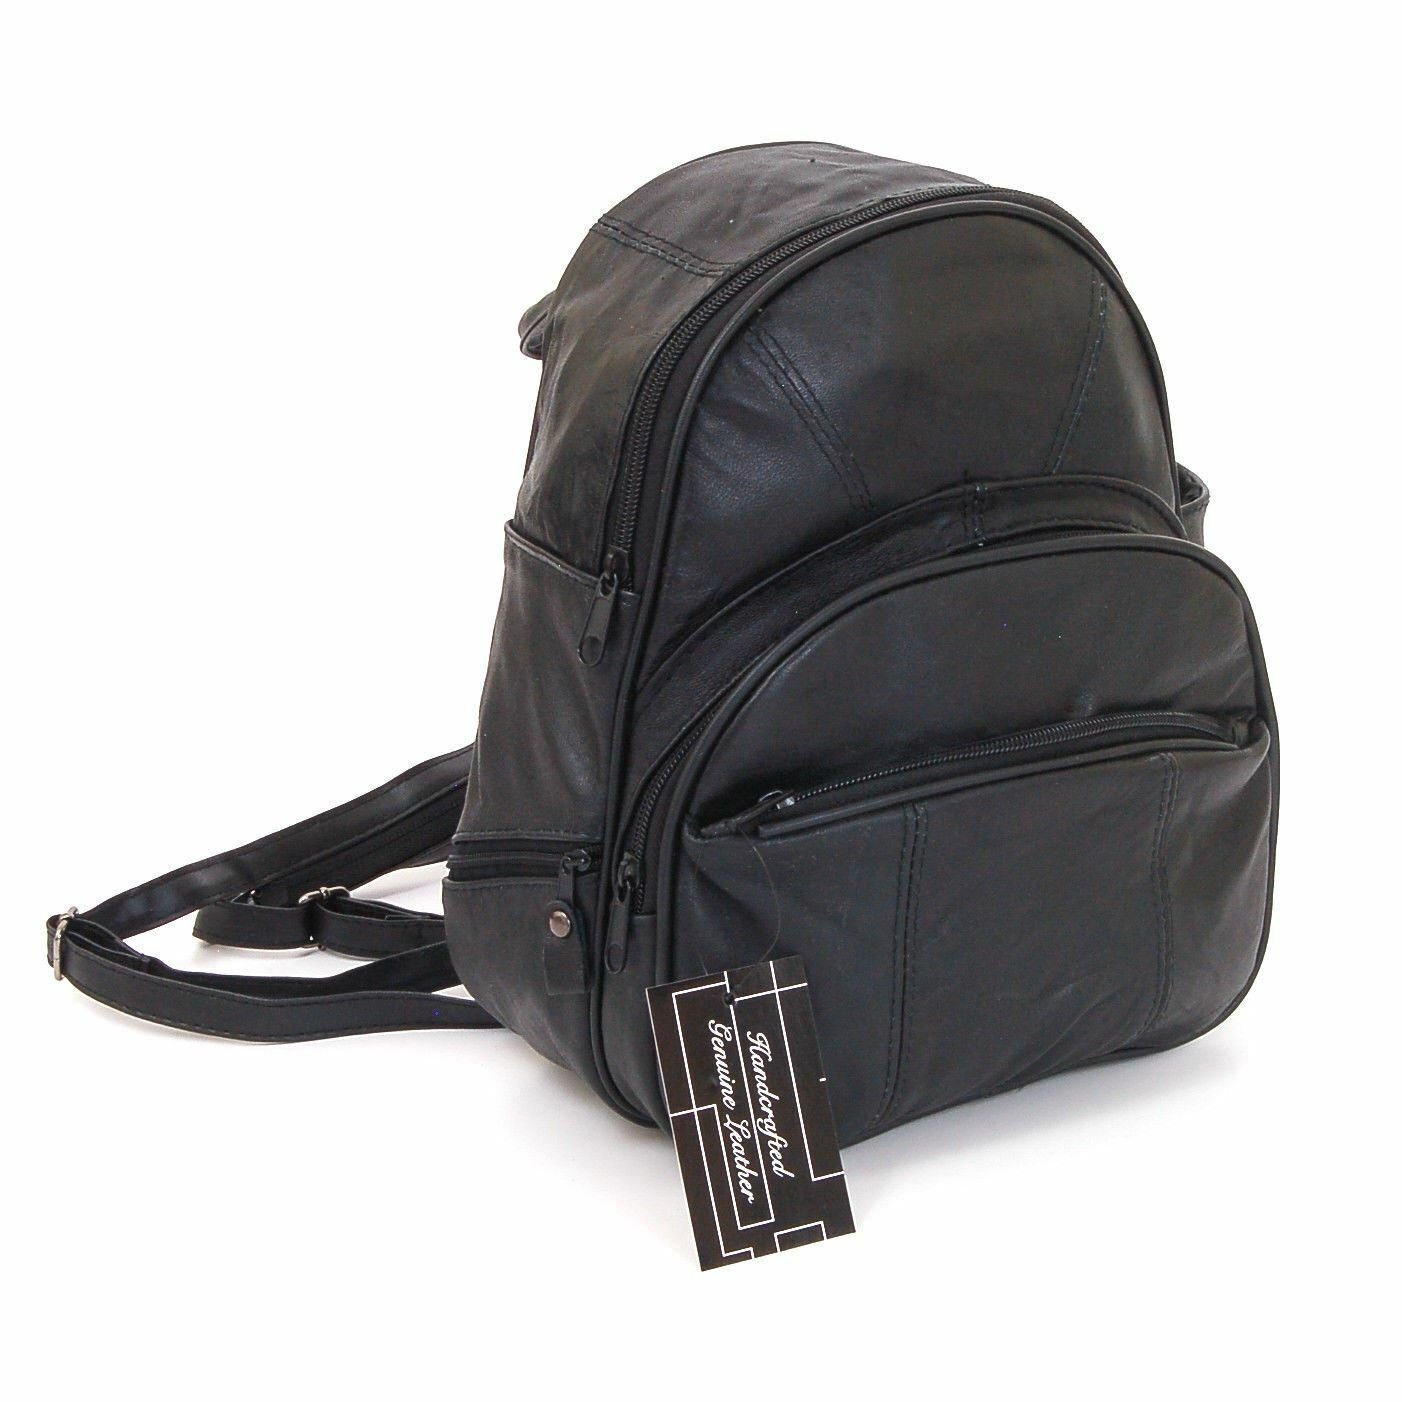 Leather Backpack Purse Mid Size & Convertible into single strap sling Bag